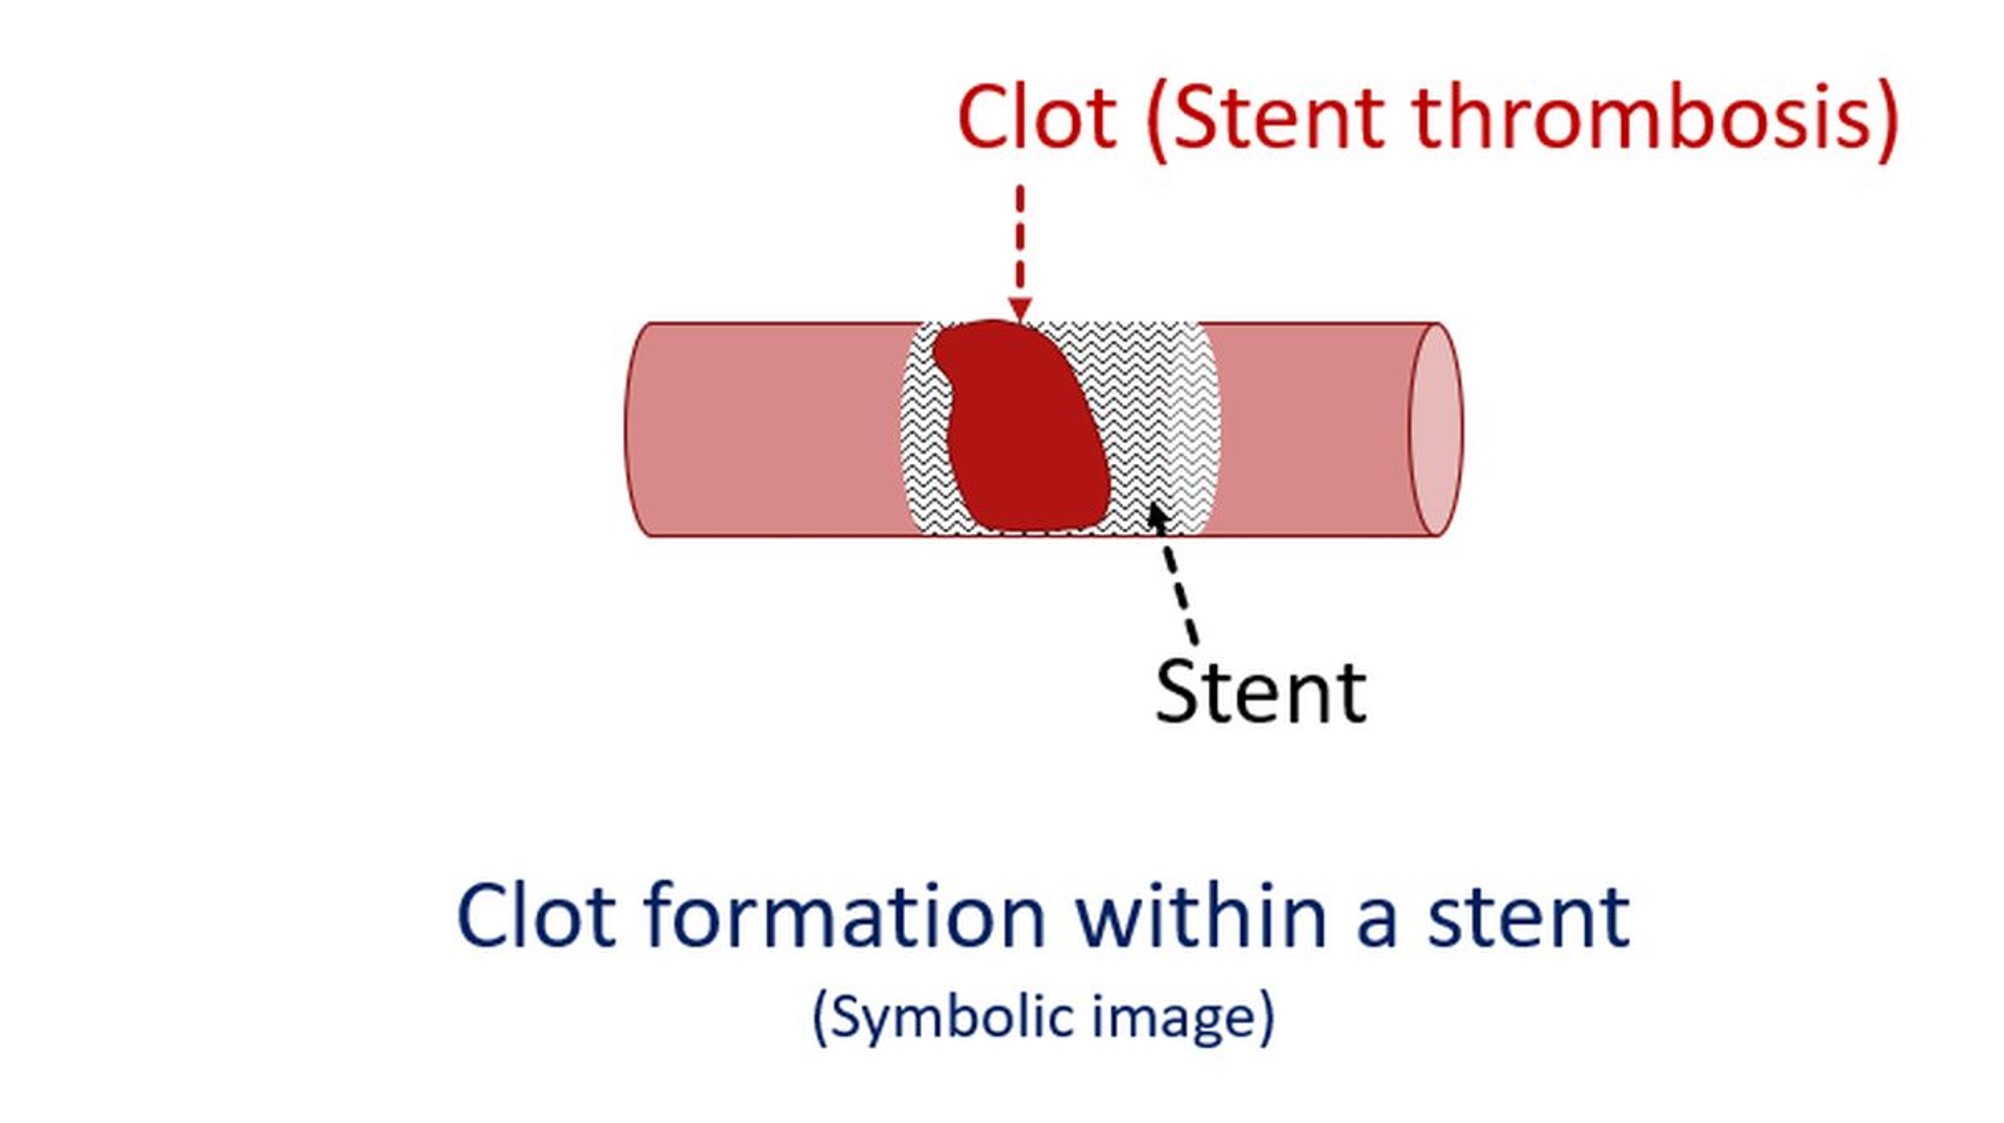 Clot formation within a stent (stent thrombosis)